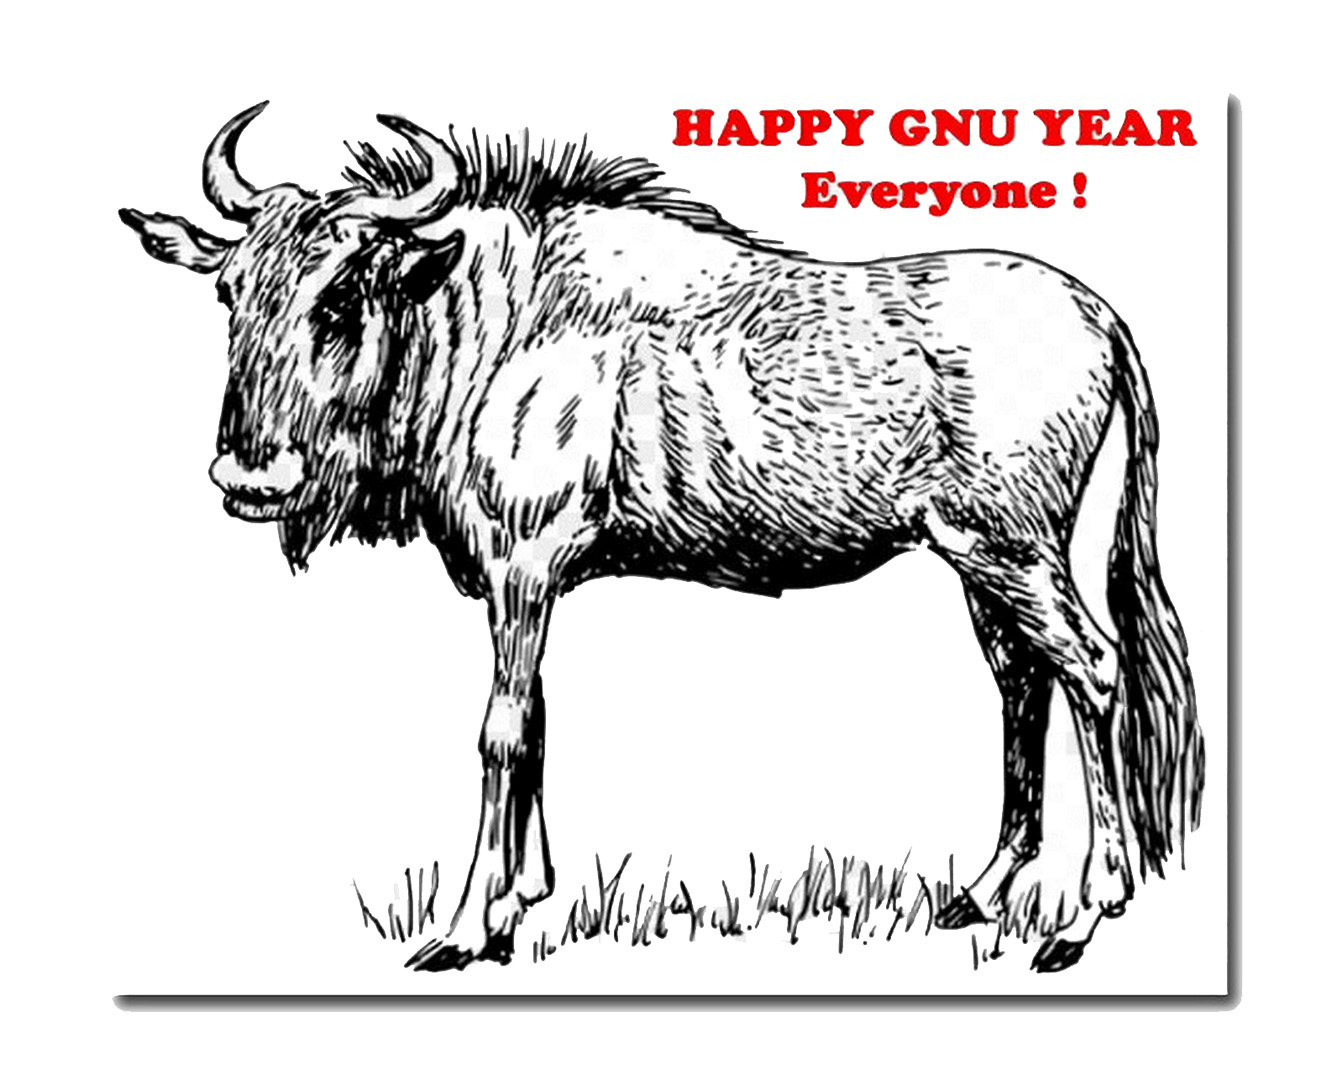 Out with the old, in with the Gnu